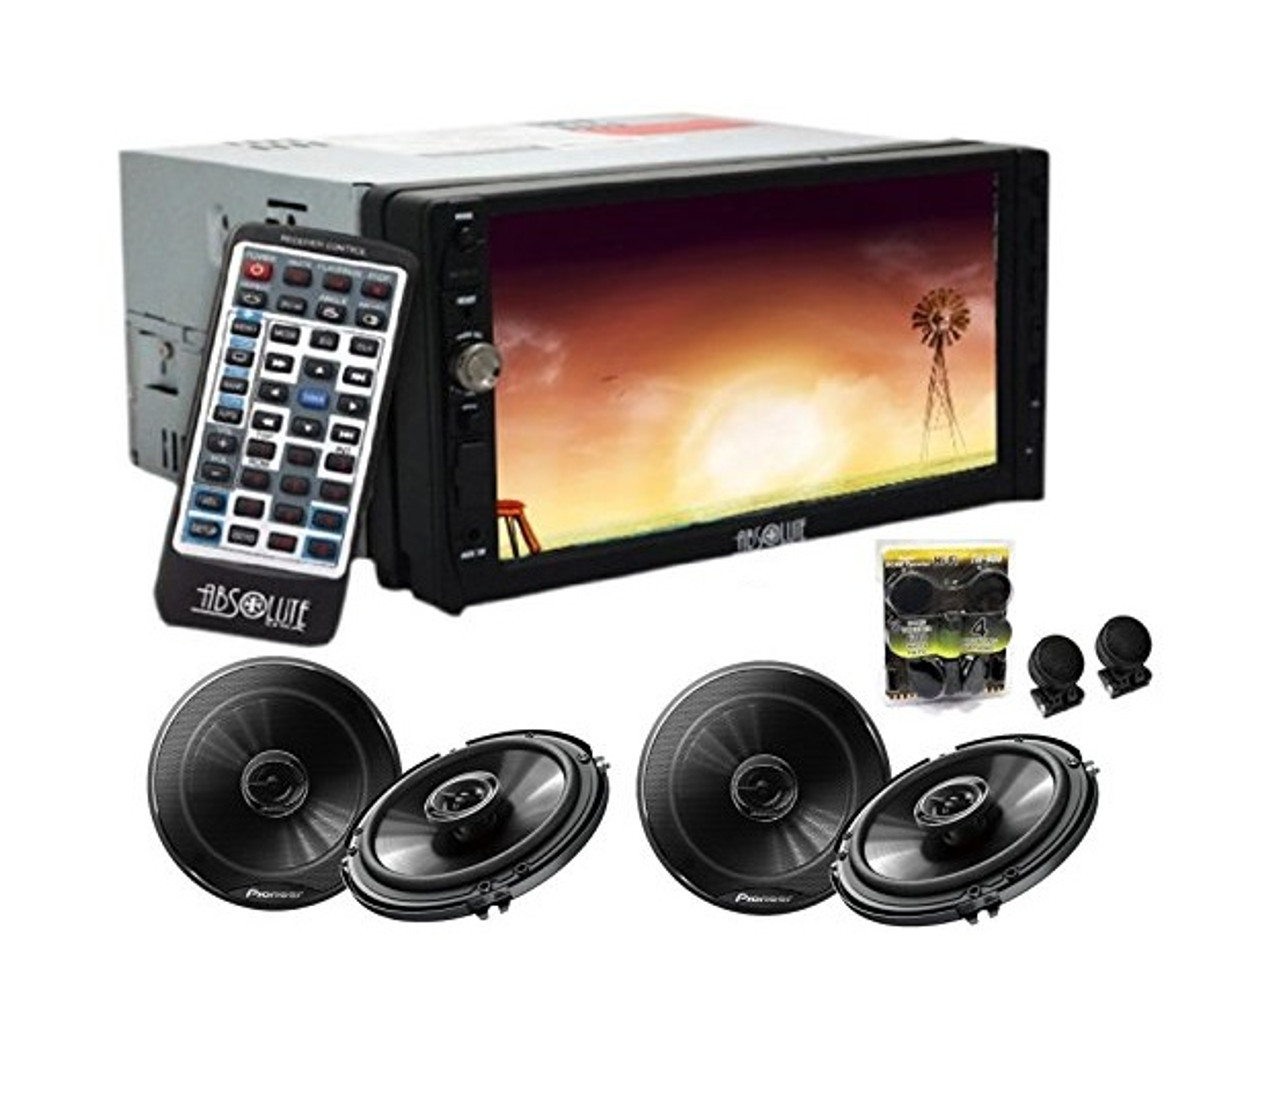 Absolute DD-3000ABT 7-Inch Double Din Multimedia DVD Player Receiver With 2 Pair Pioneer TS-G1645R 6.5 Speakers And Free Absolute TW600 Tweeter